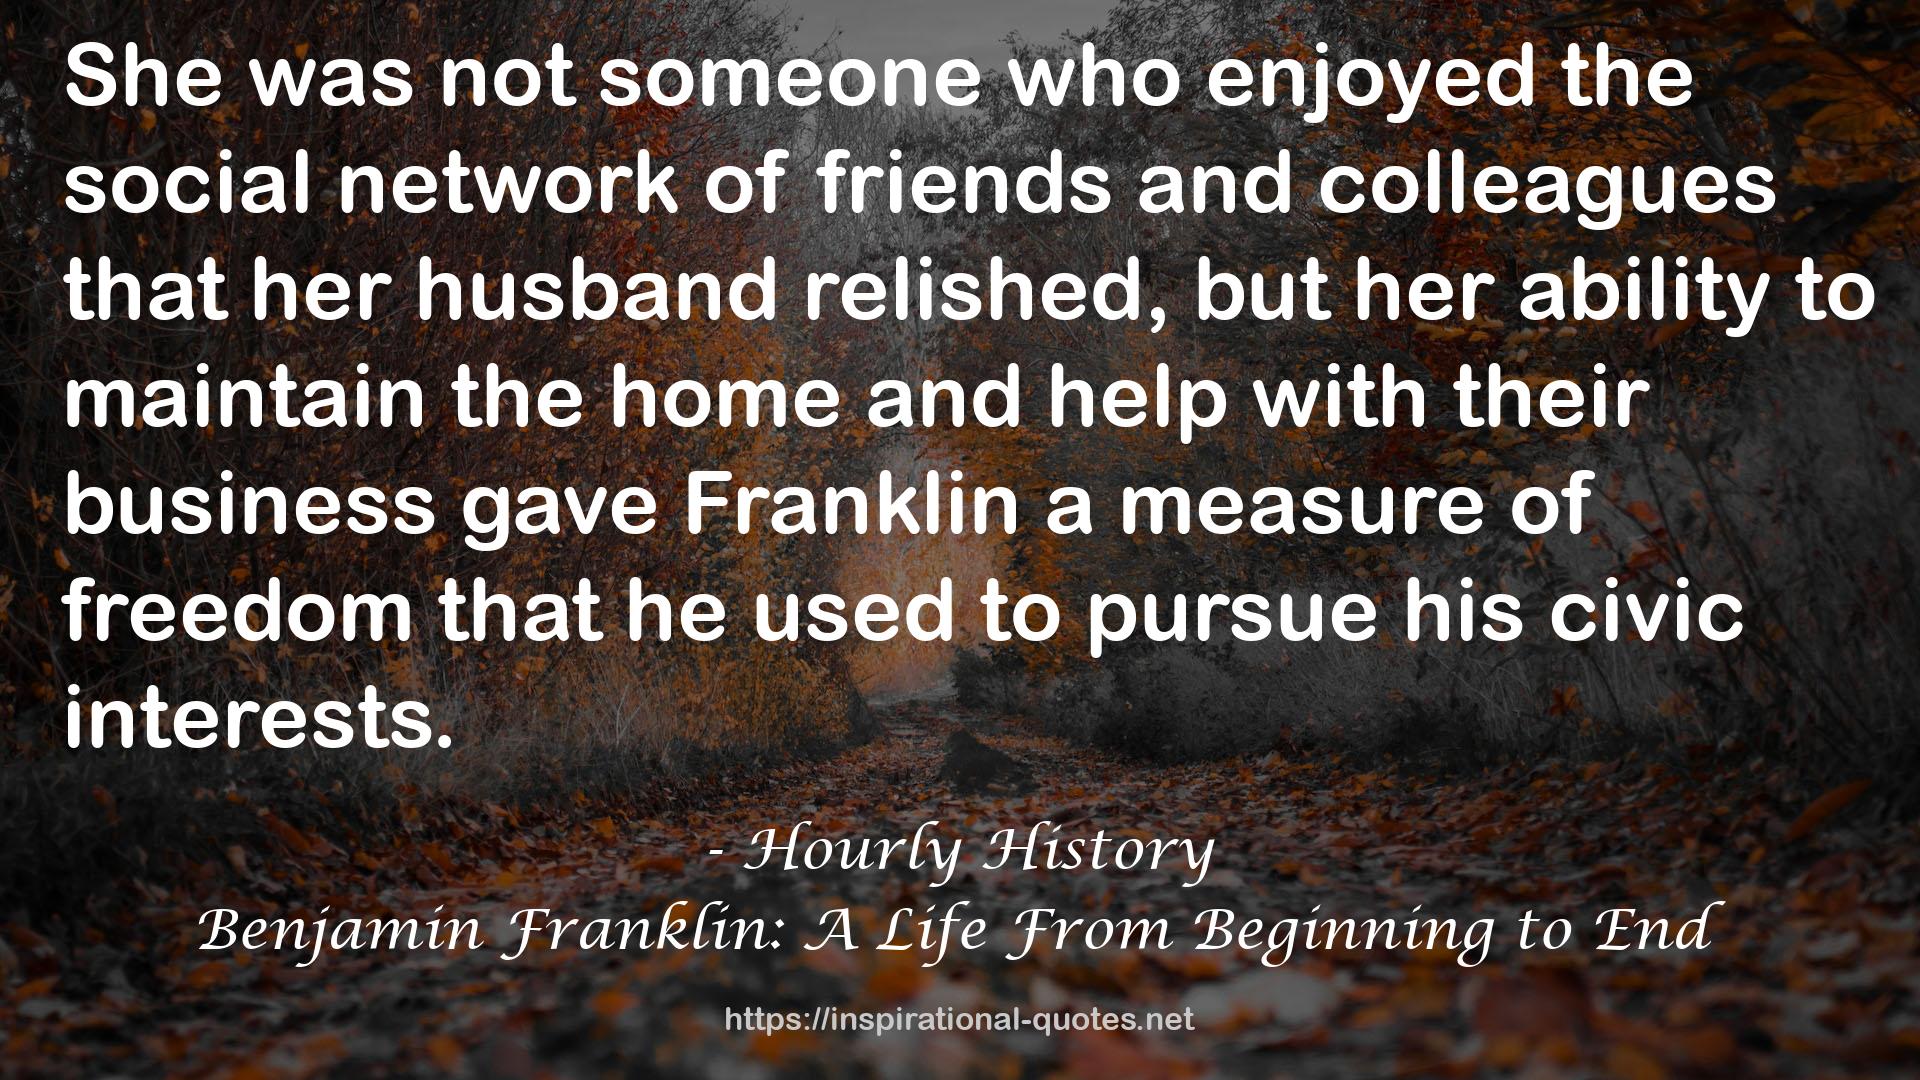 Benjamin Franklin: A Life From Beginning to End QUOTES